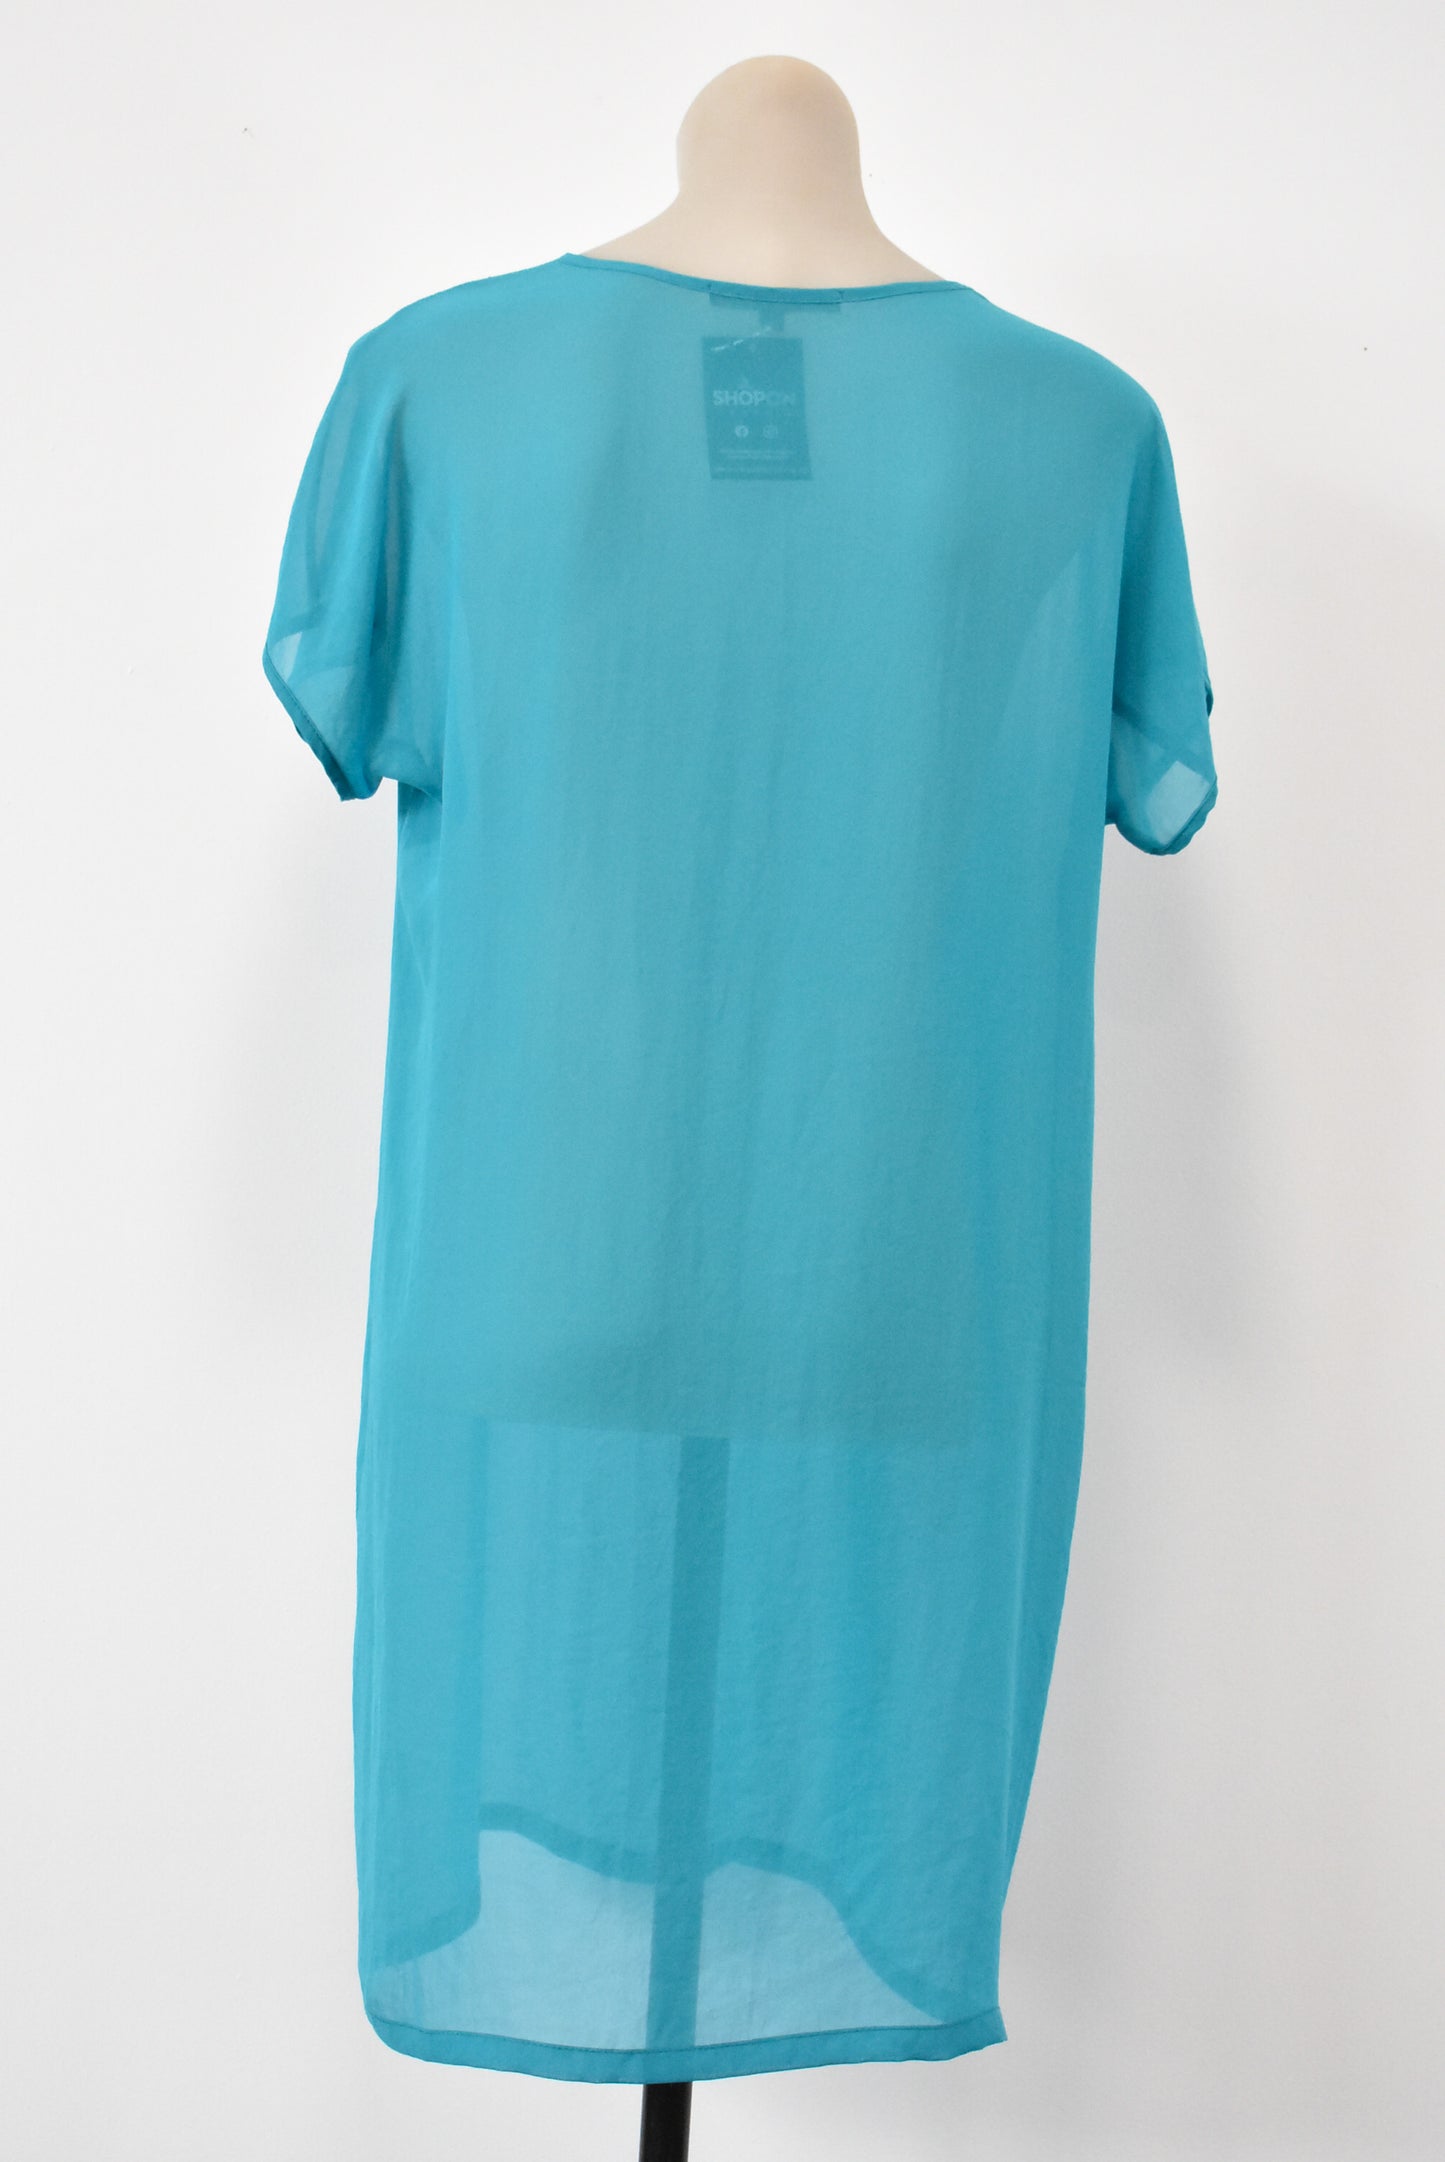 End of Story sheer top/tunic, 8